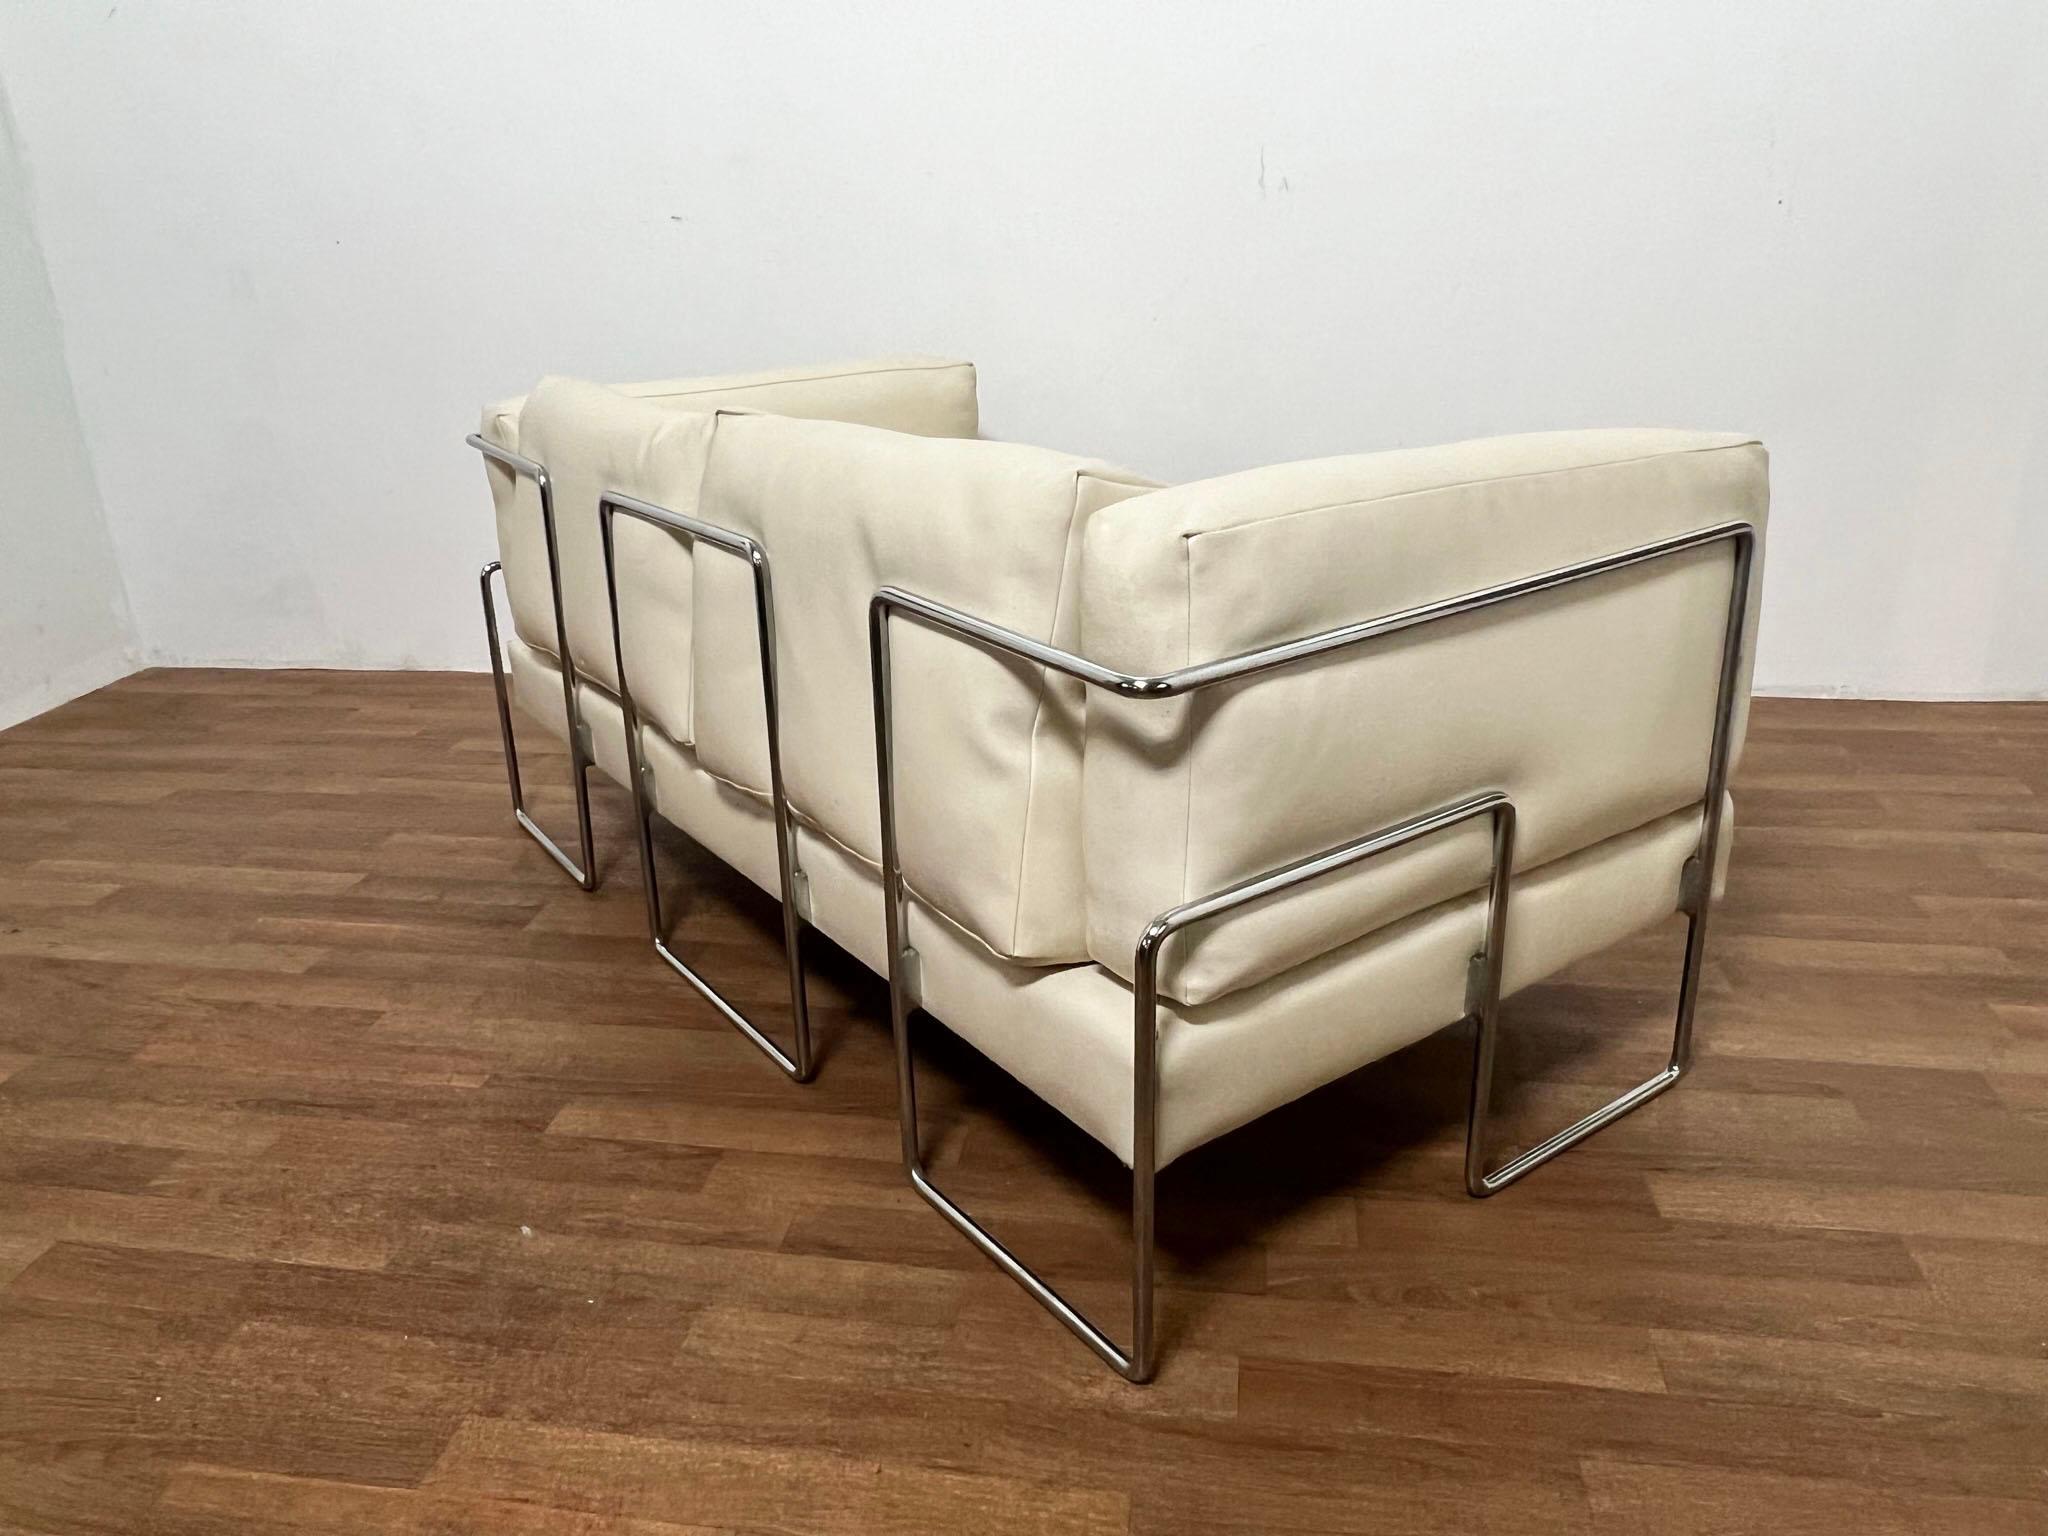 A Bauhaus inspired loveseat sofa by the influential Chinese architect Kwok Hoi Chan (1939-1990), for Steiner of France, ca. 1960s.